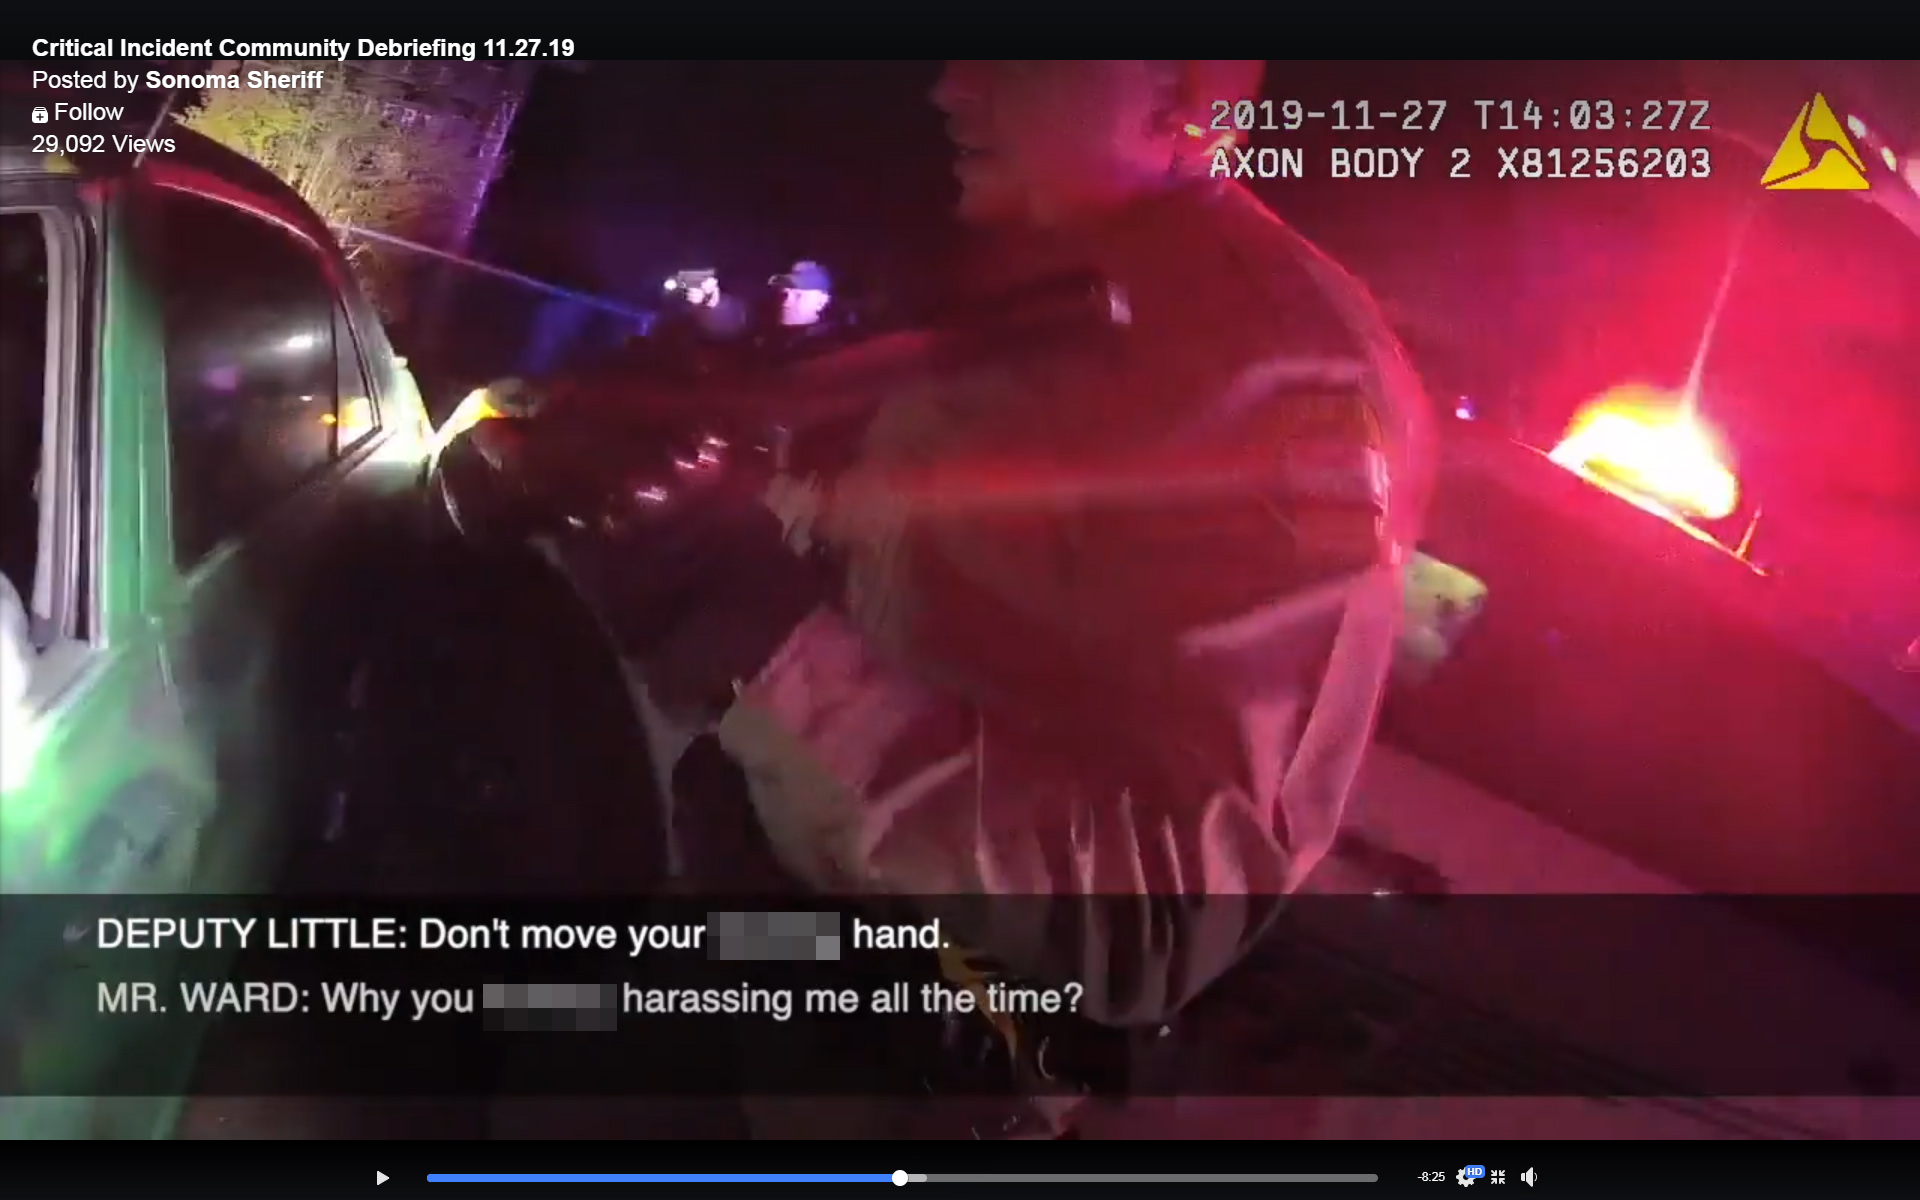 PHOTO: Body camera footage released by the Sonoma Sheriff in Northern California shows Sonoma County Deputies taking David Ward into custody on Nov. 28, 2019.